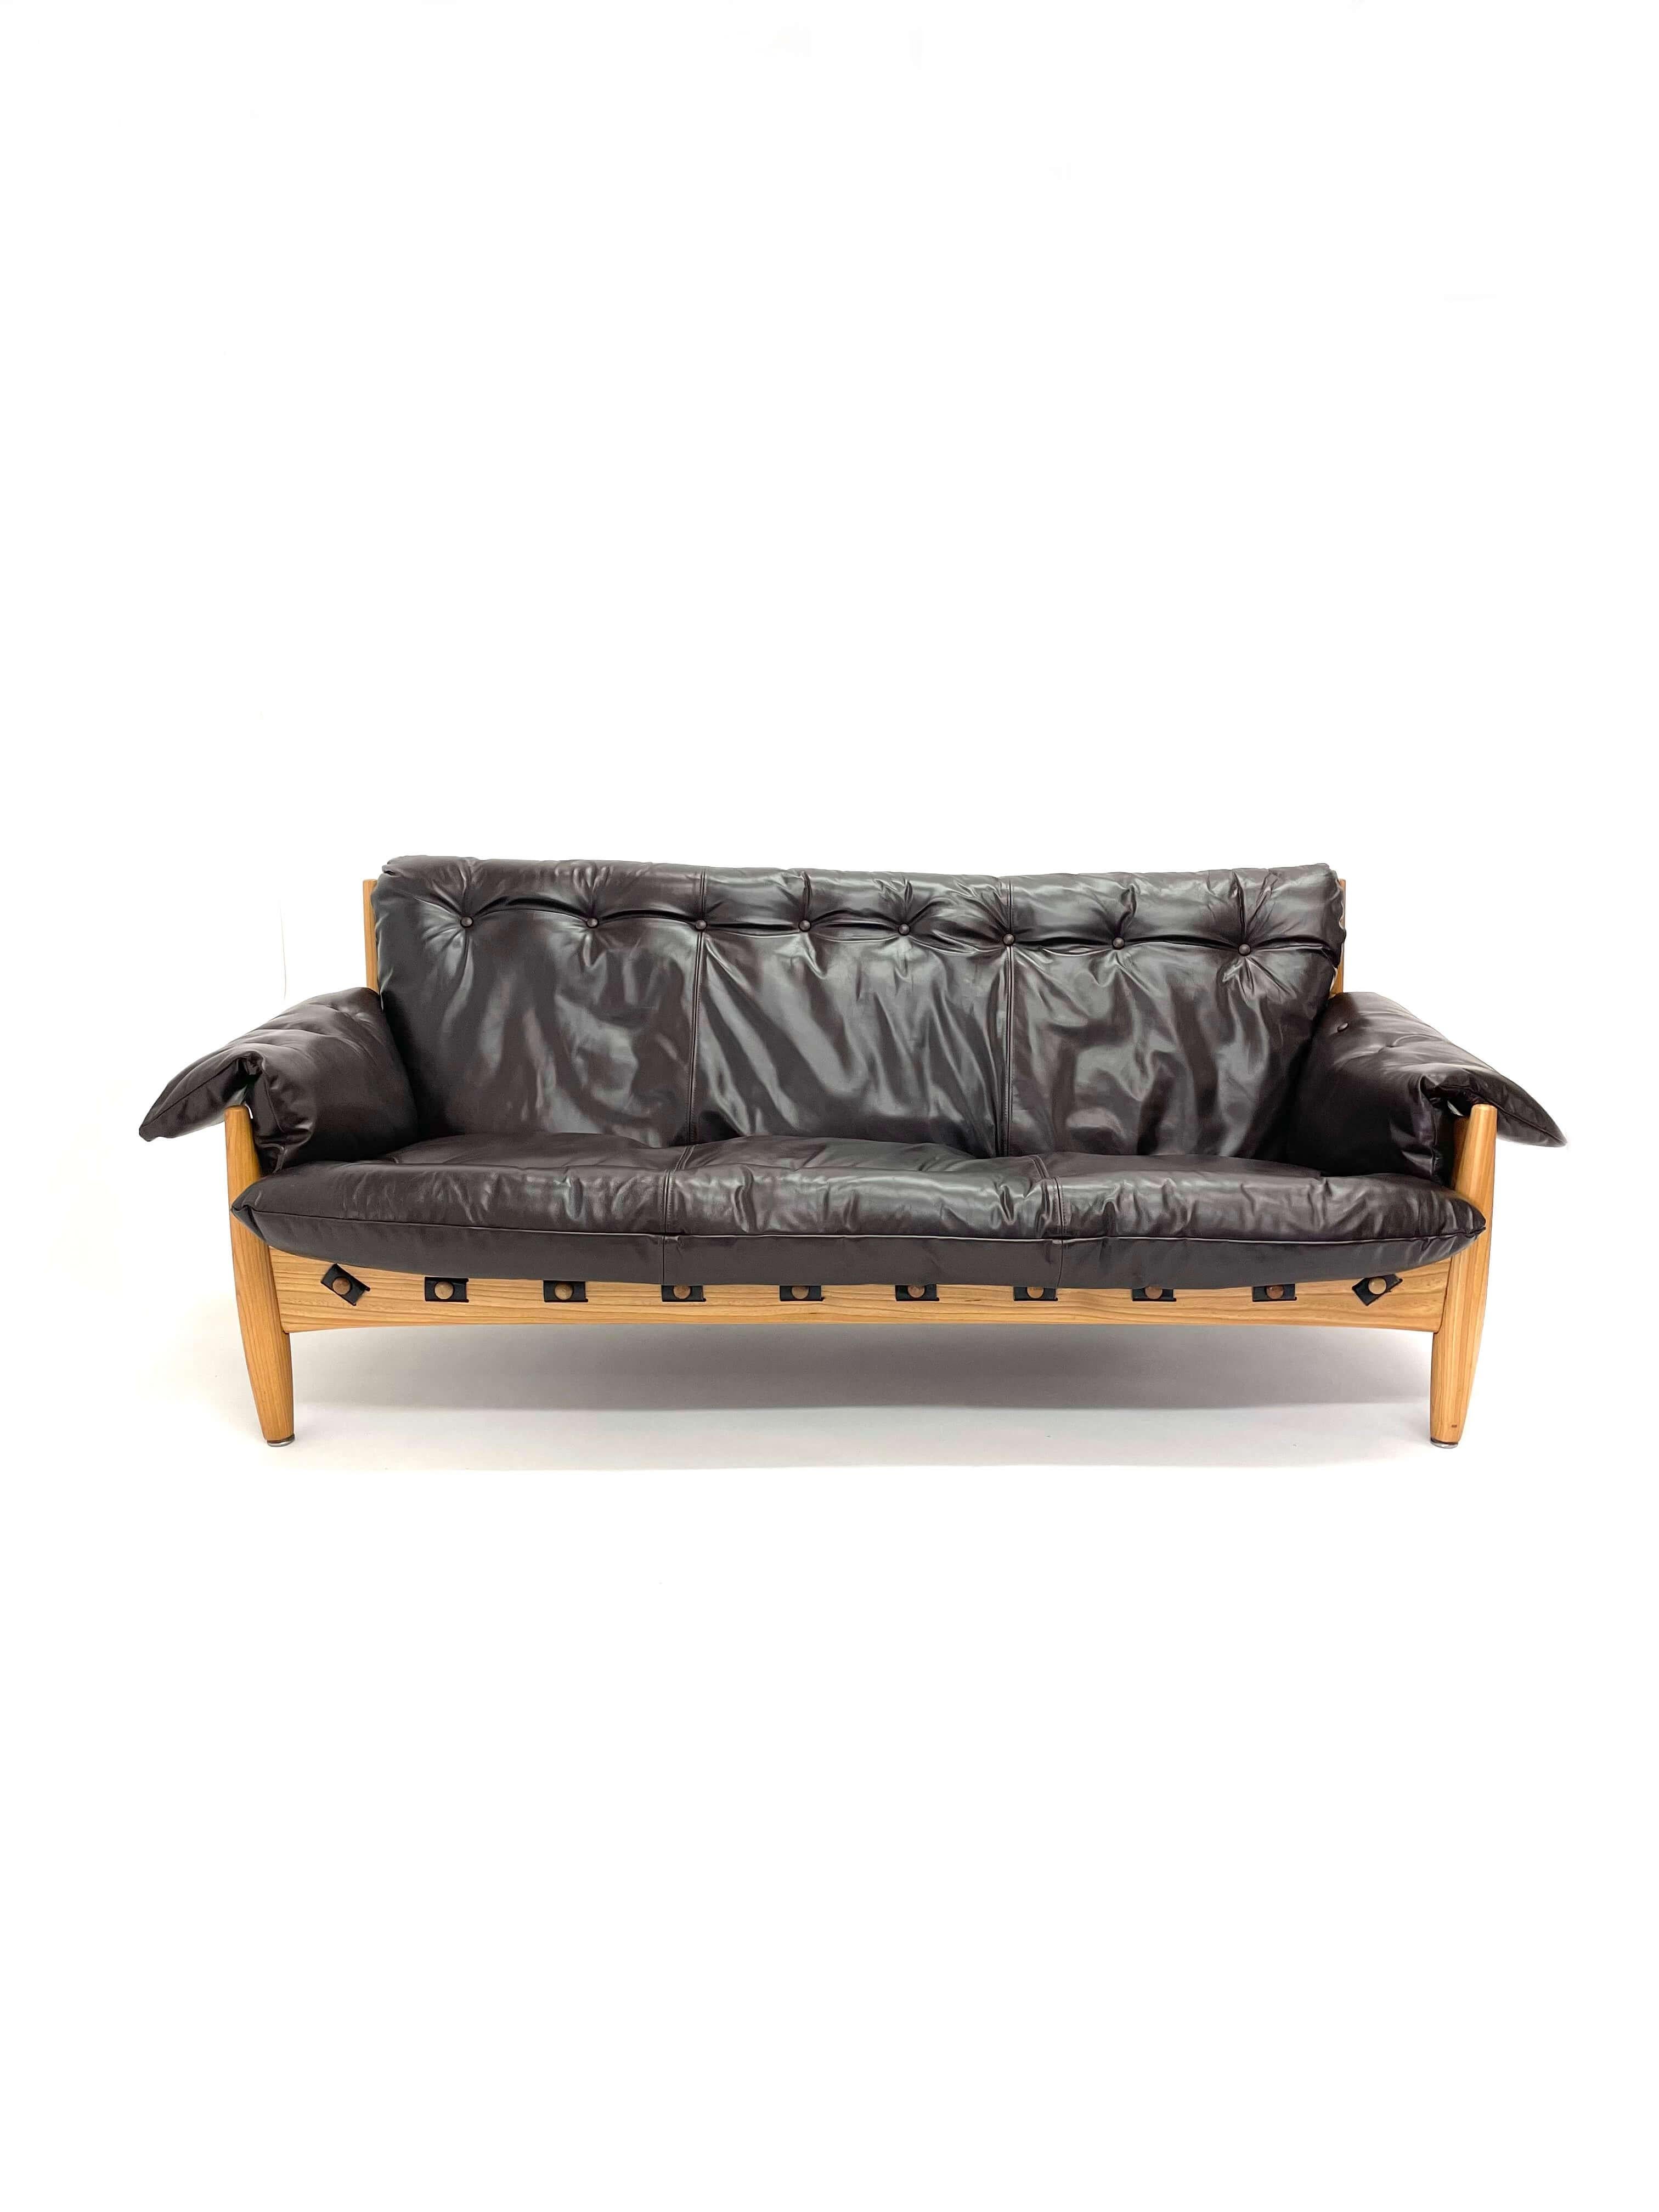 Mid-Century Modern Brazilian Modern 3-seater Sofa in Espresso Leather by Sergio Rodrigues  For Sale